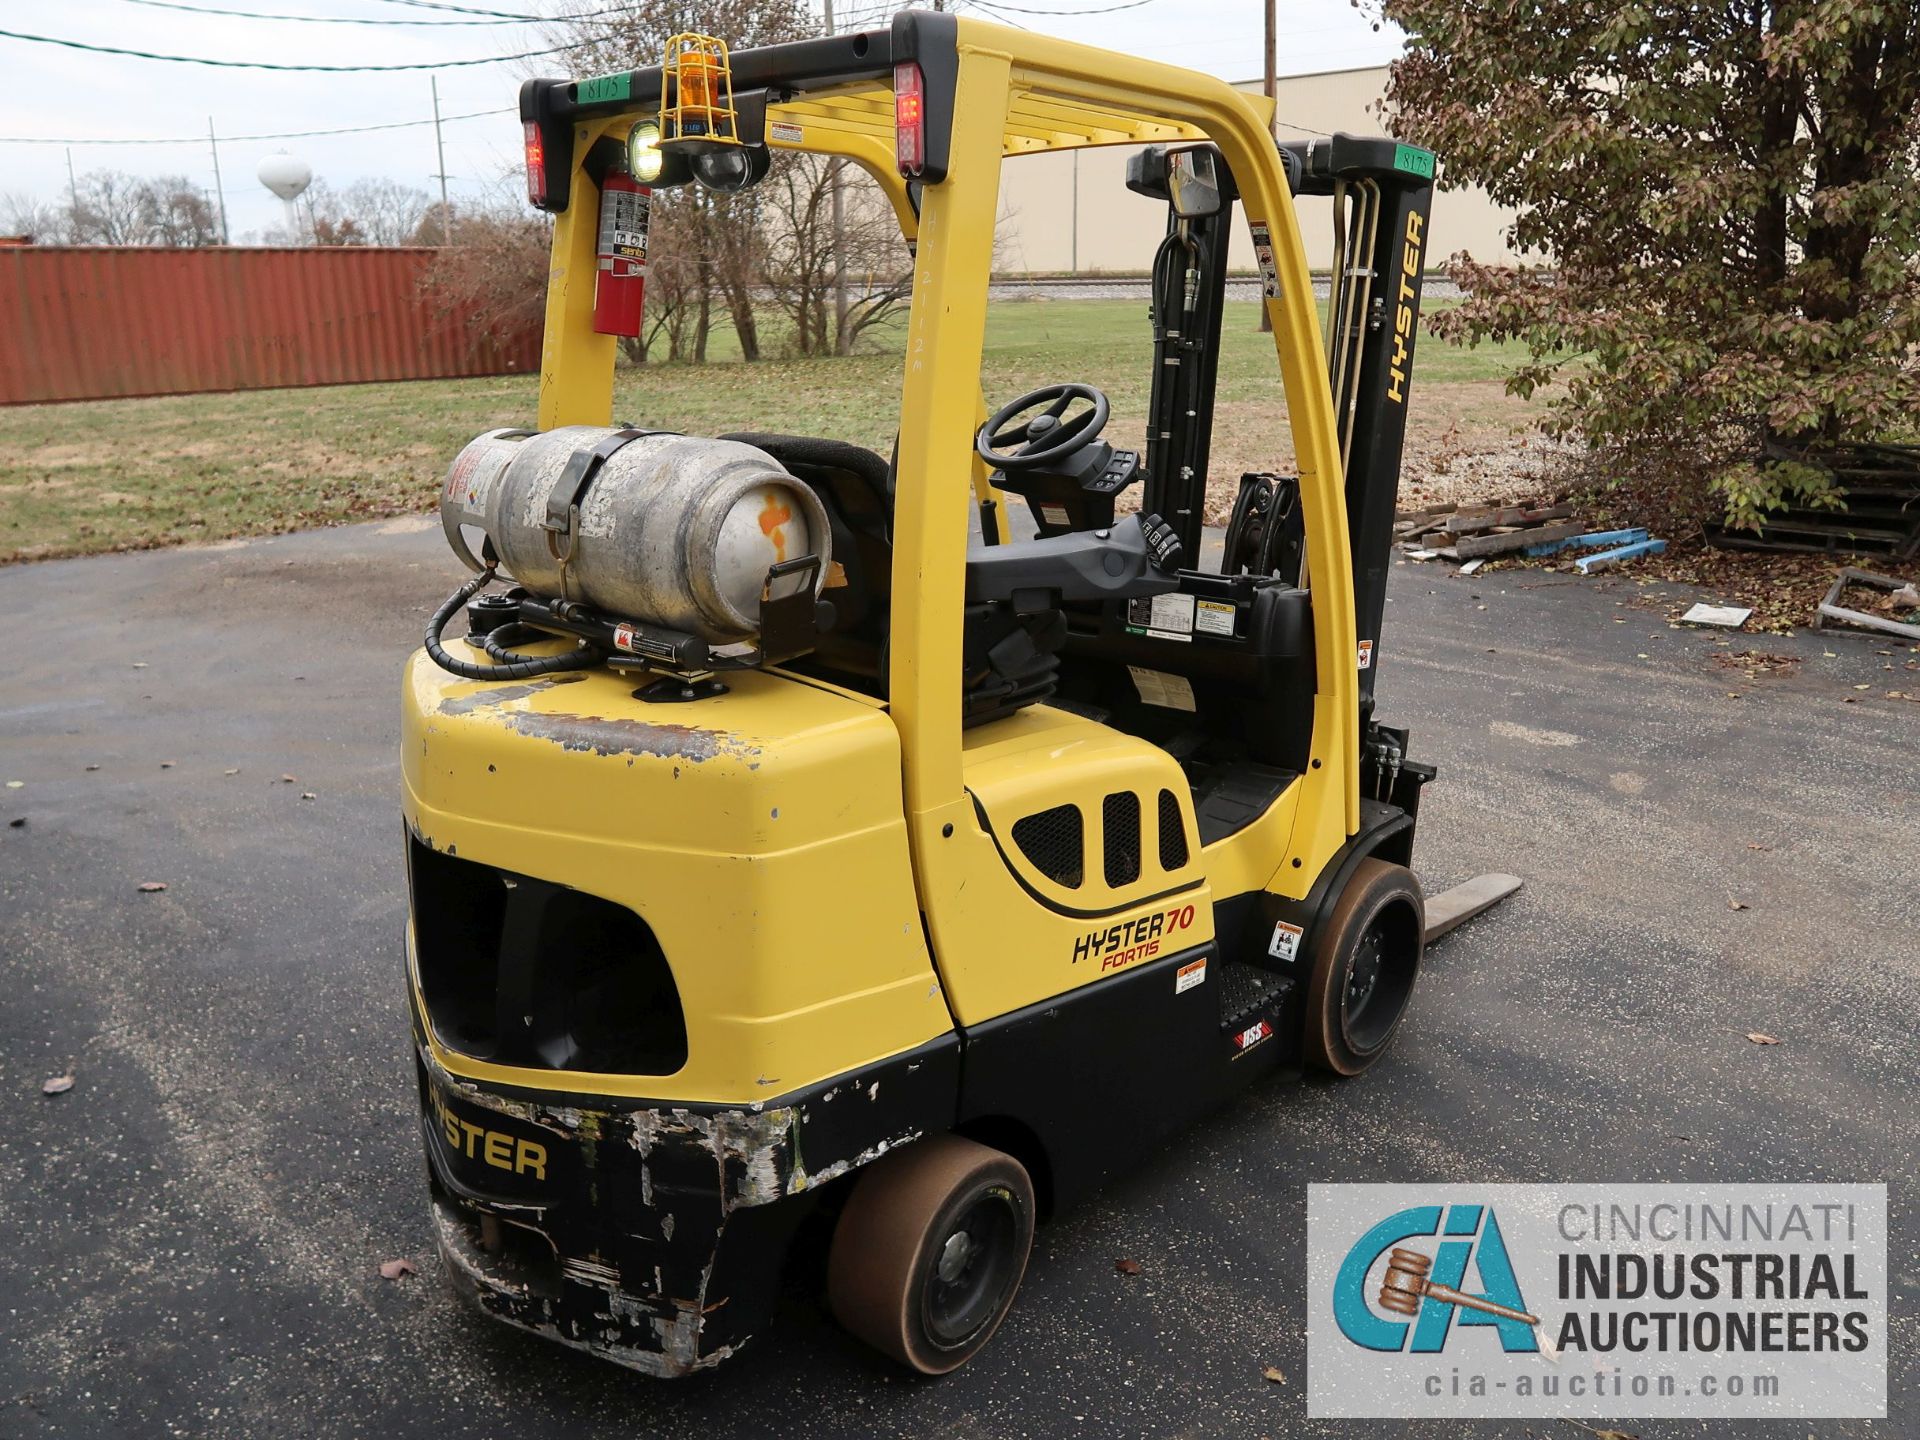 7,000 LB HYSTER MODEL S70 FT LP GAS FORKLIFT; S/N G187V02112M, 80" MAST HEIGHT, 122" MAX LIFT - Image 5 of 11